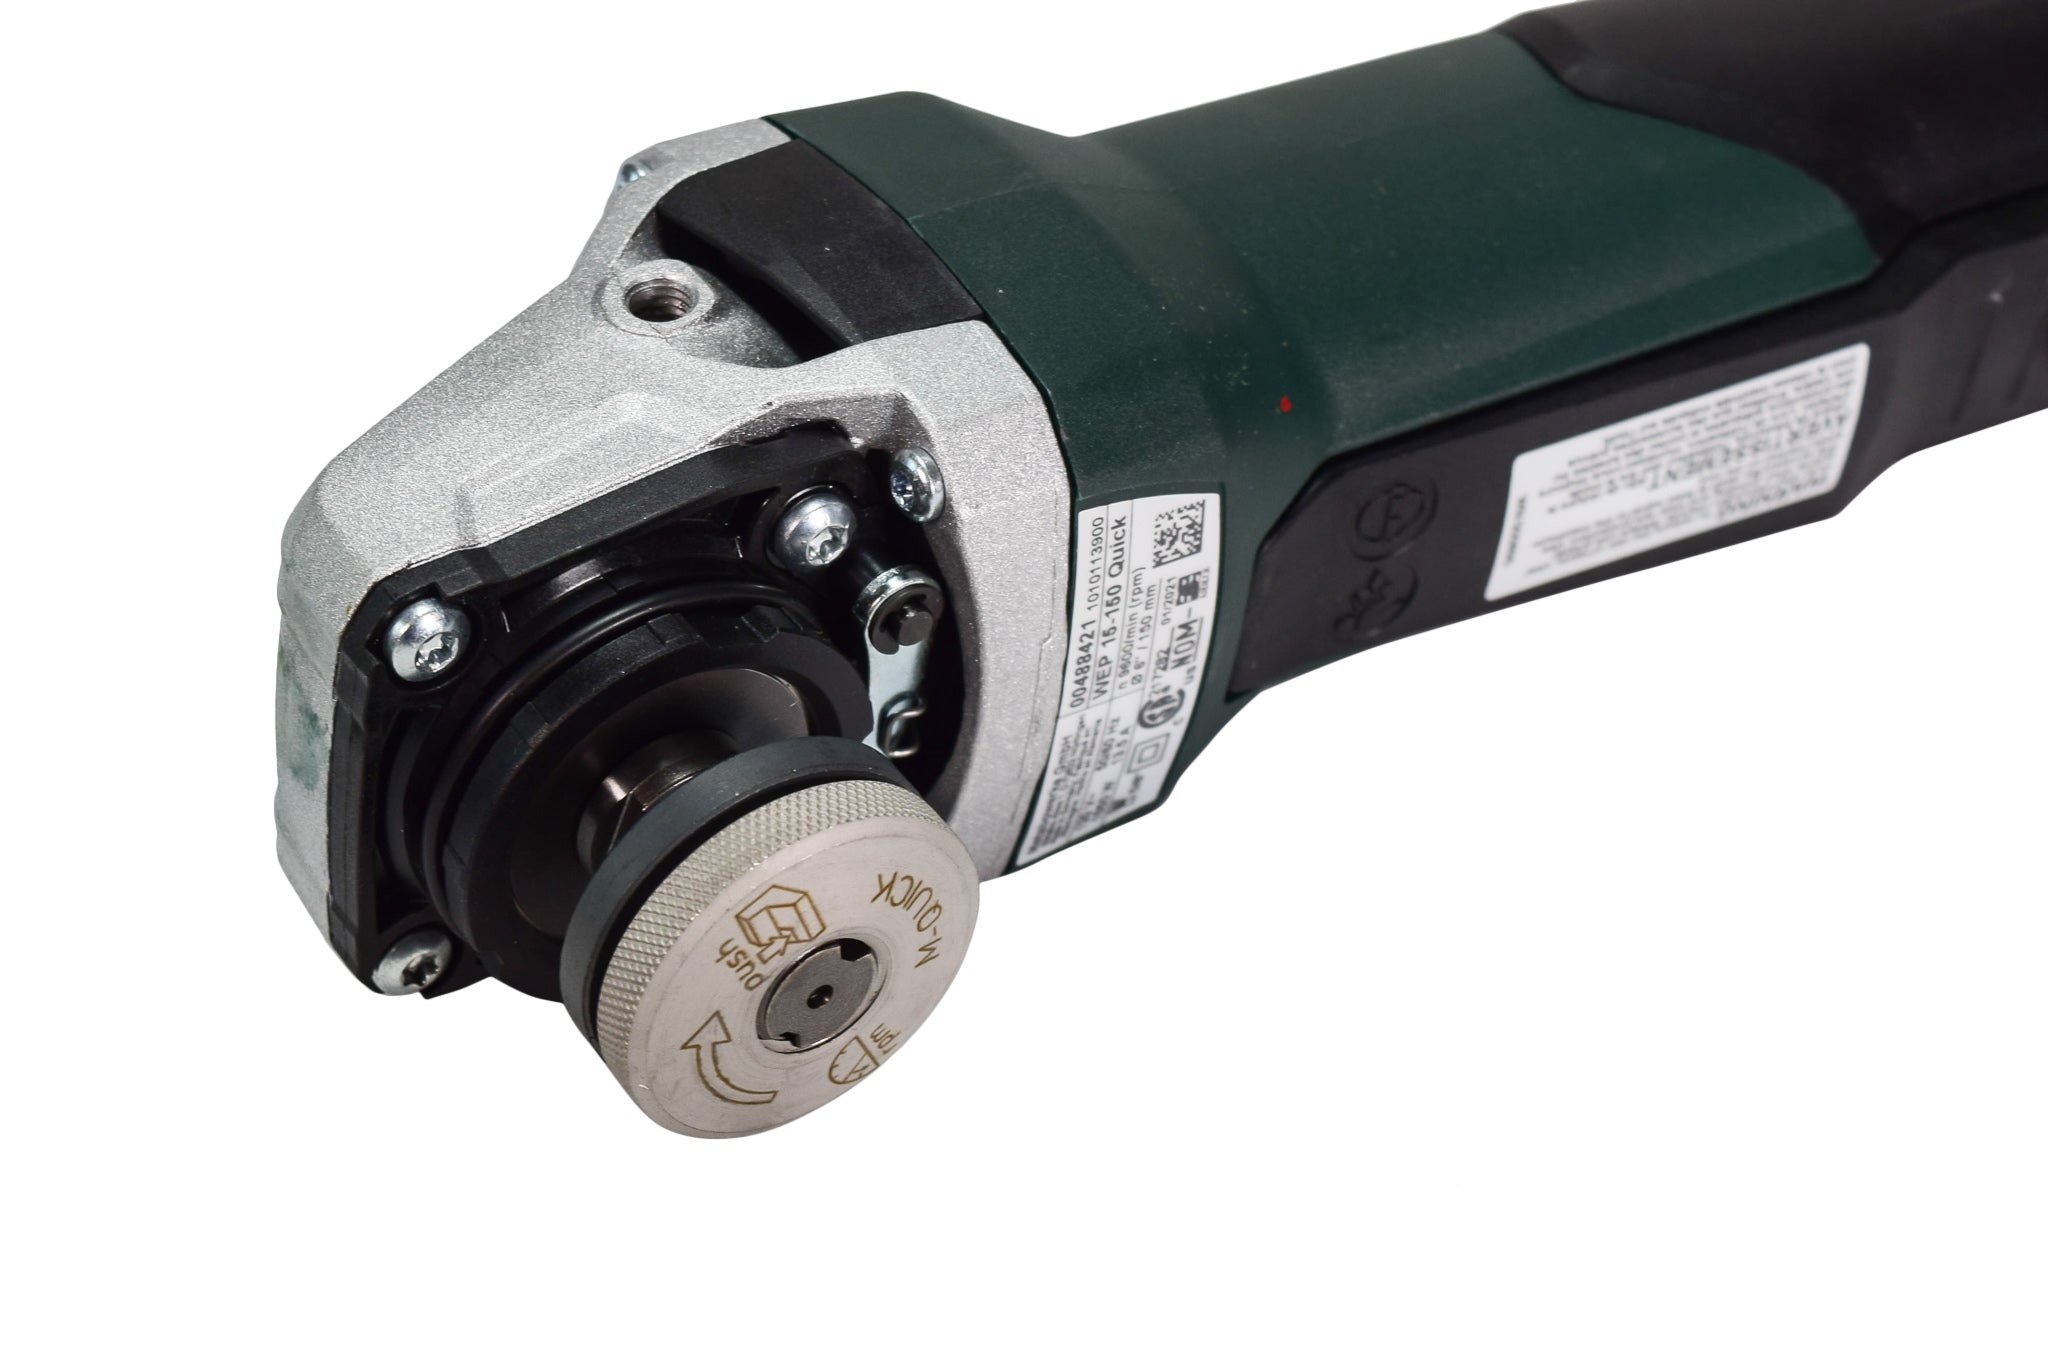 Metabo-600488420-WEP-15-150-Quick-6-Corded-Angle-Grinder-9-600-RPM-13.5-AMP-CLONE-image-13